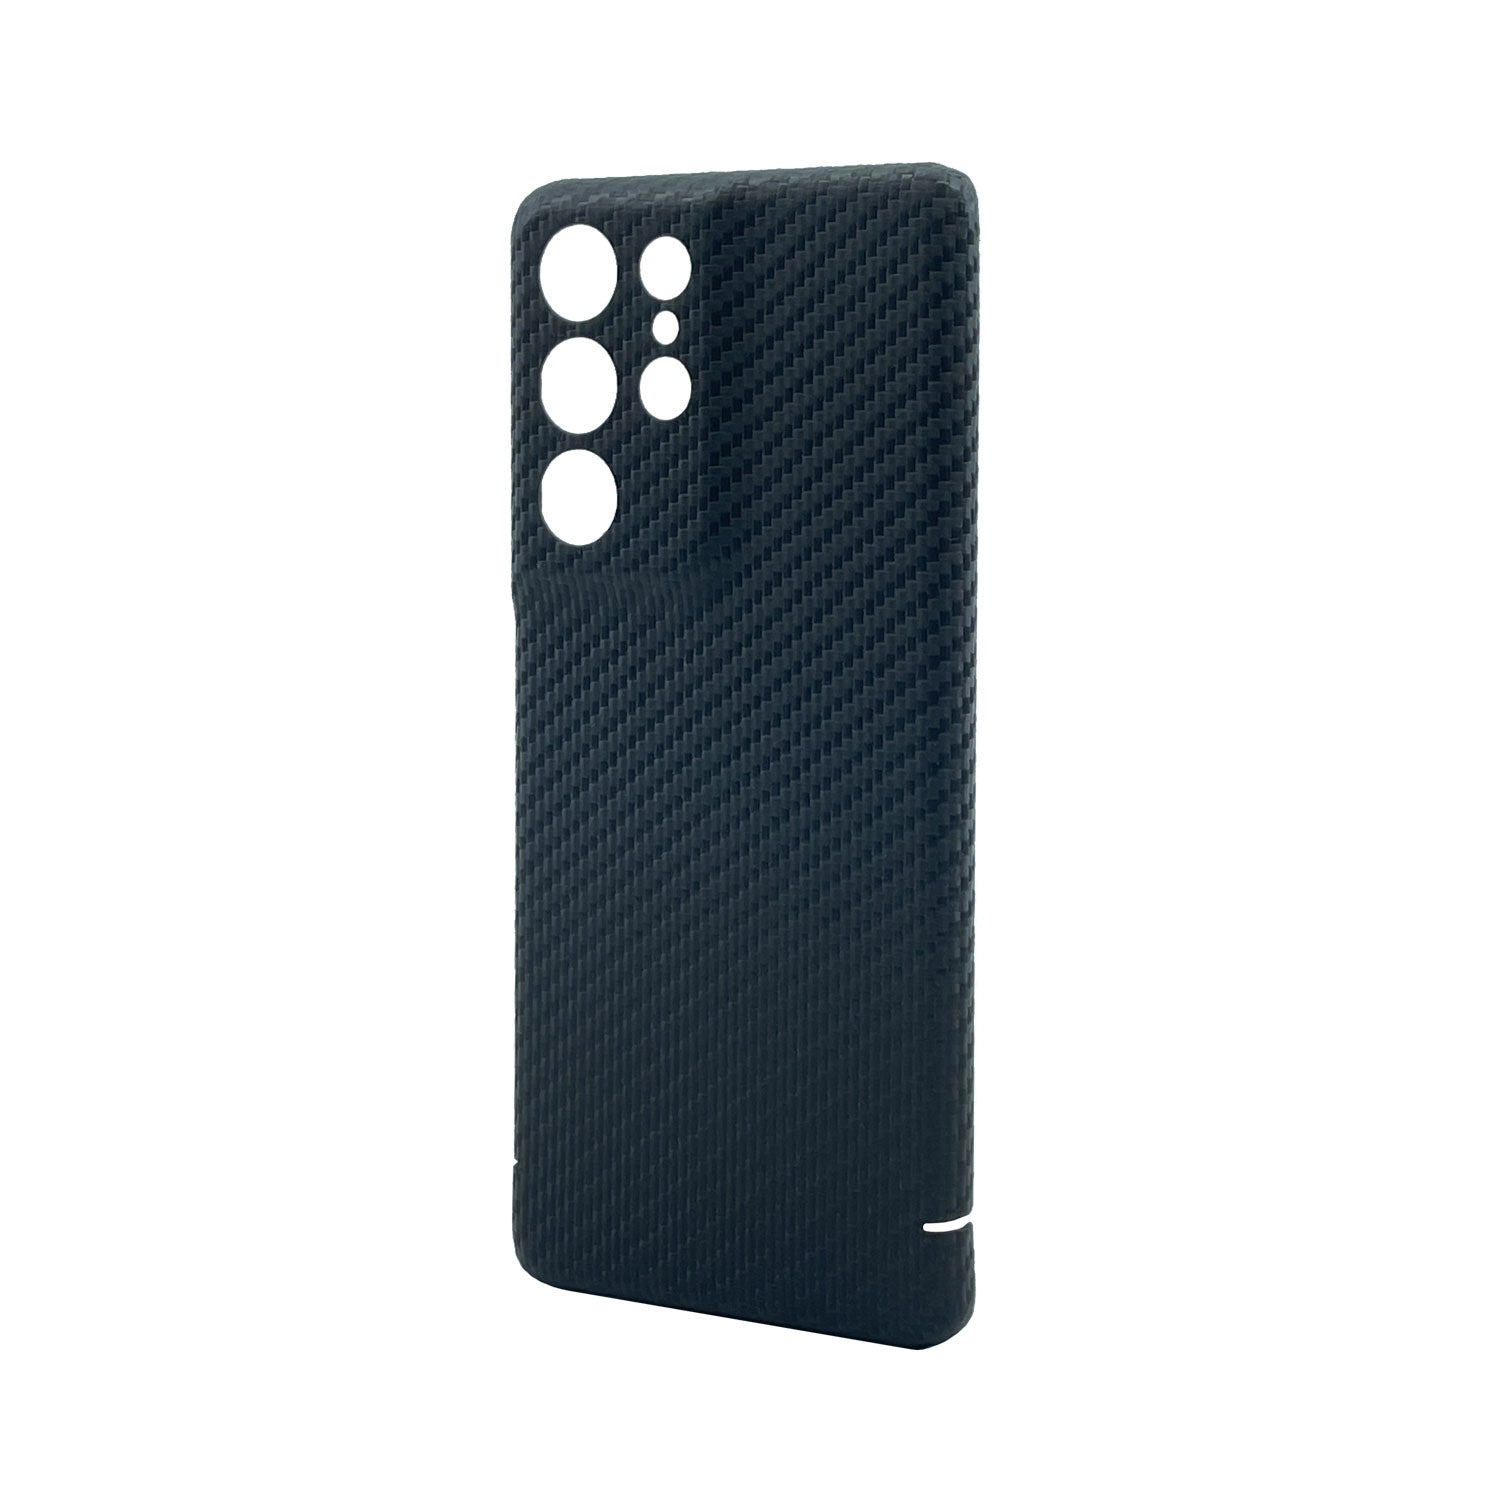 Nevox Carbonseries Cover for Samsung S21 Ultra, Magnest Series